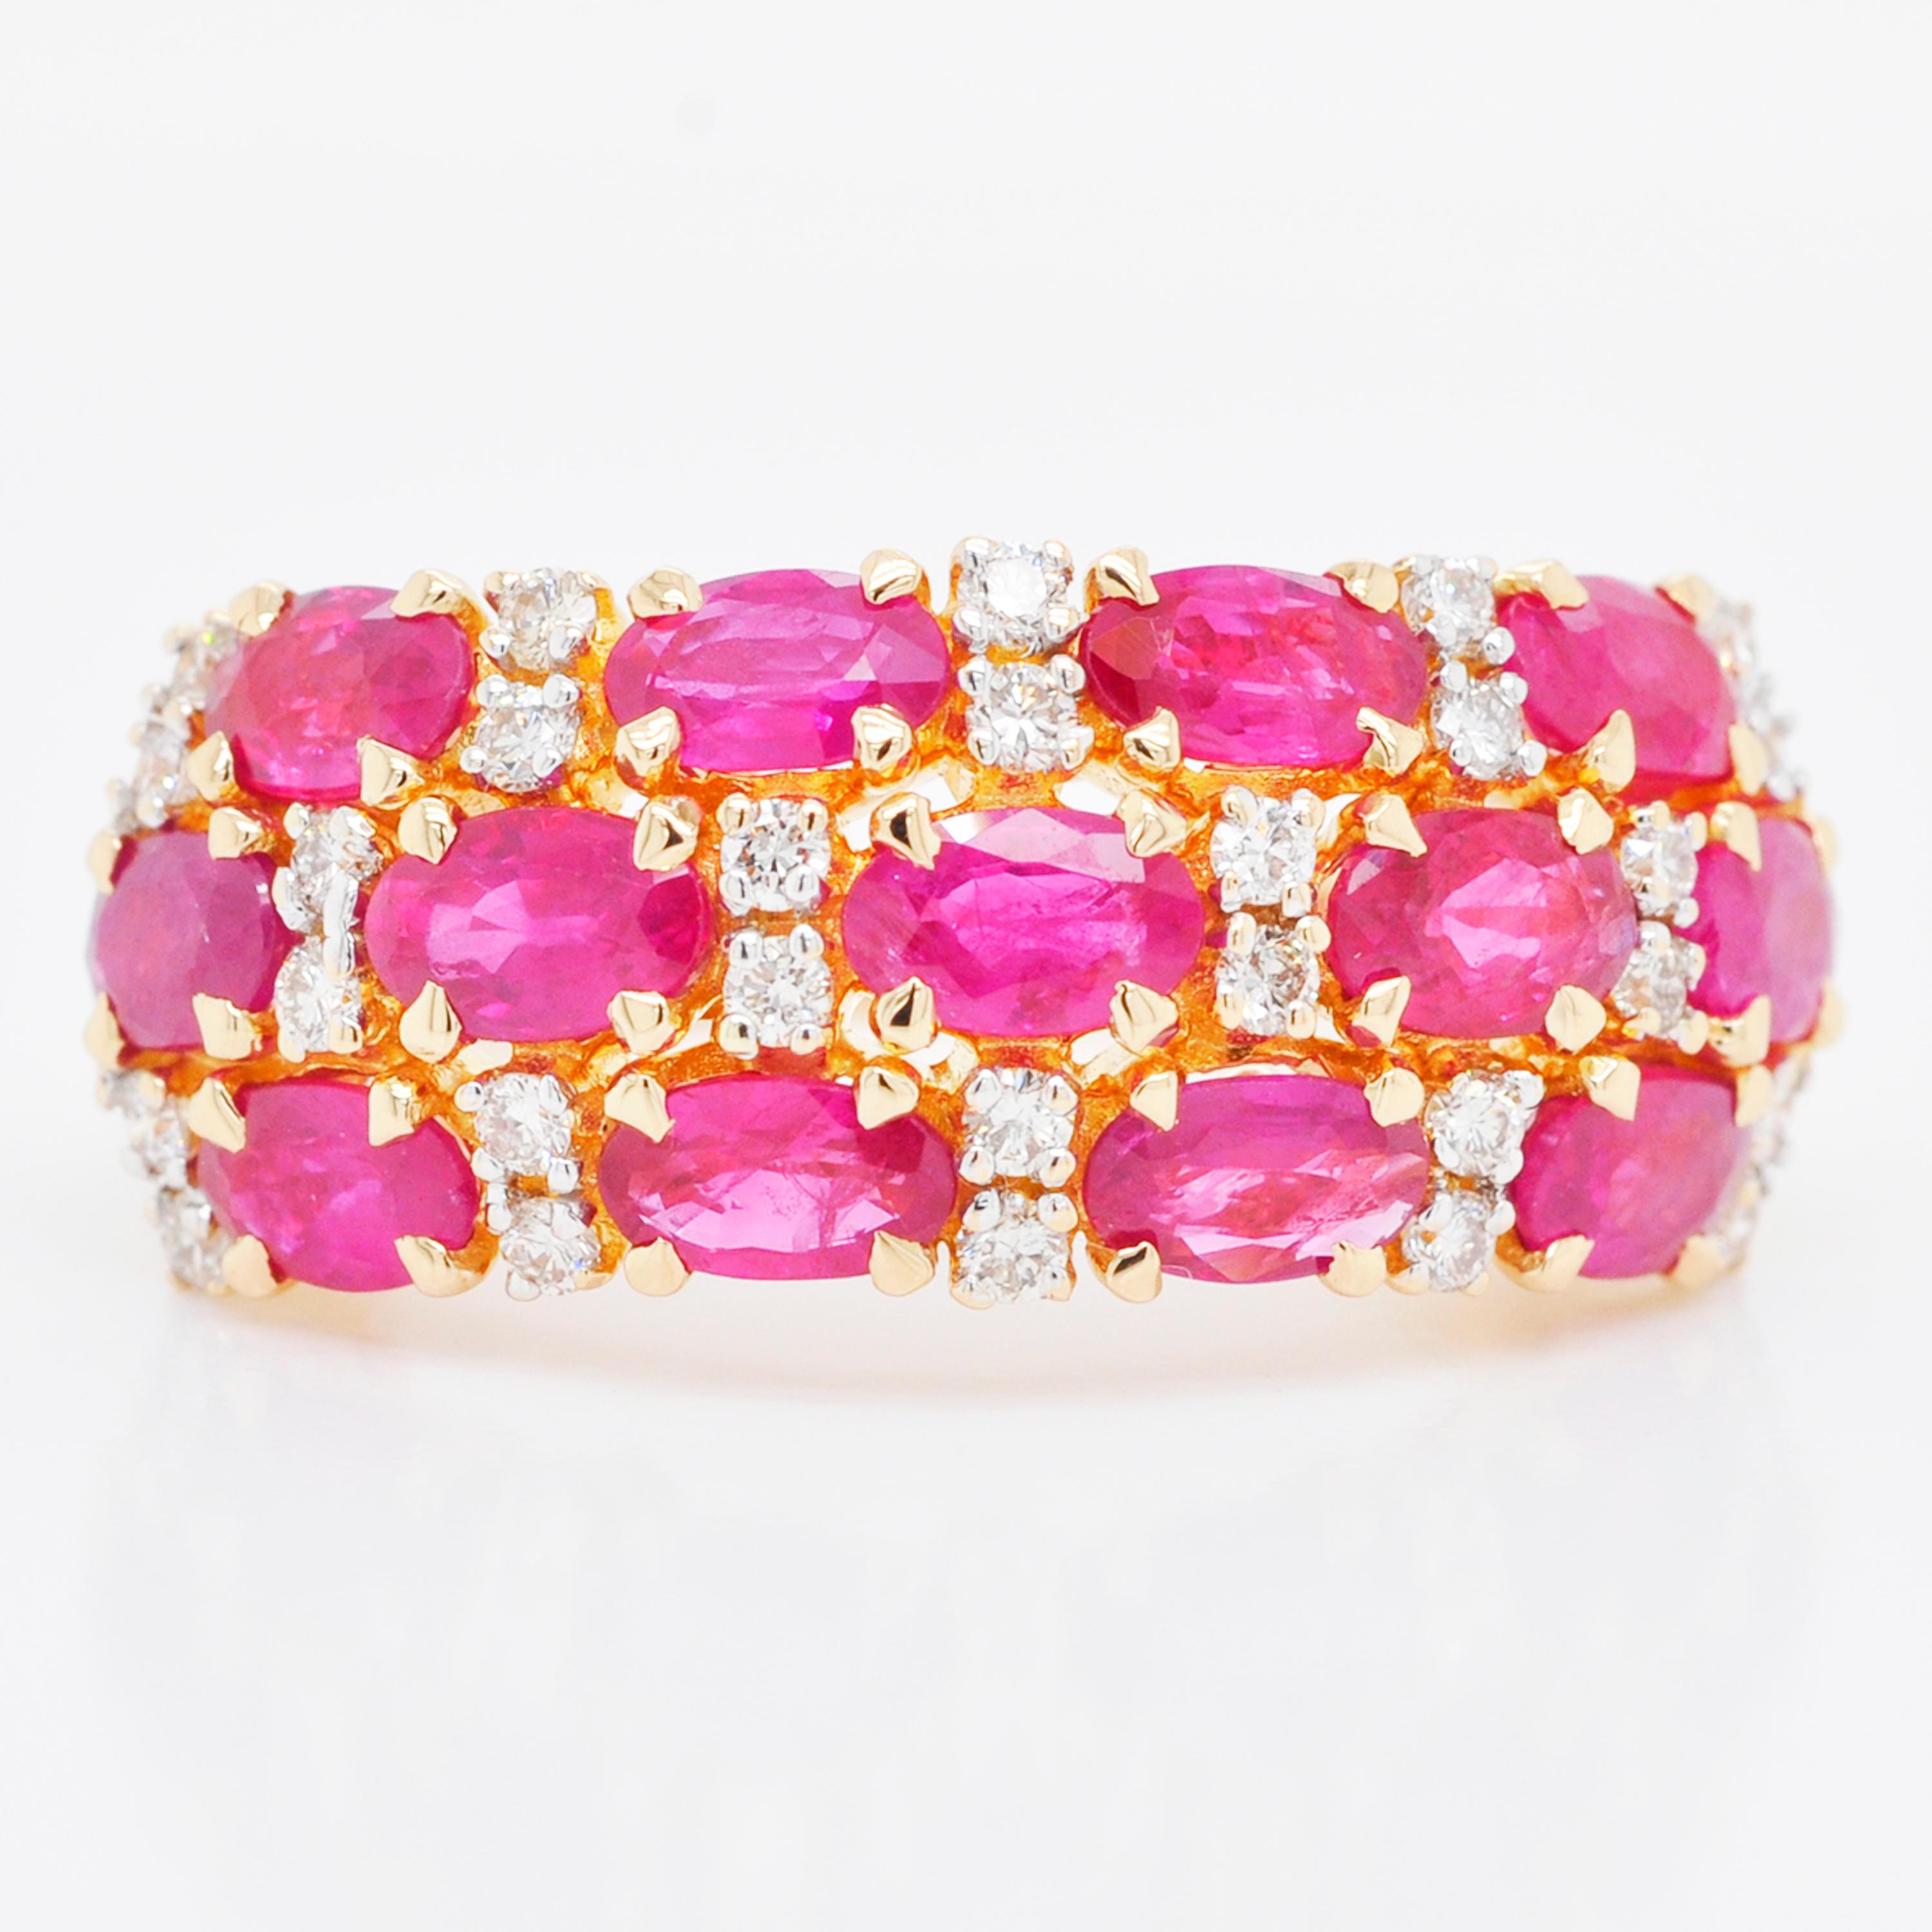 18 karat yellow gold oval ruby cluster band diamond cocktail ring. 

This enchanting oval red ruby and diamond cluster band cocktail ring is impressive. The assortment is created with lustrous oval shaped red rubies along with sparkling VVS/VS - G/H